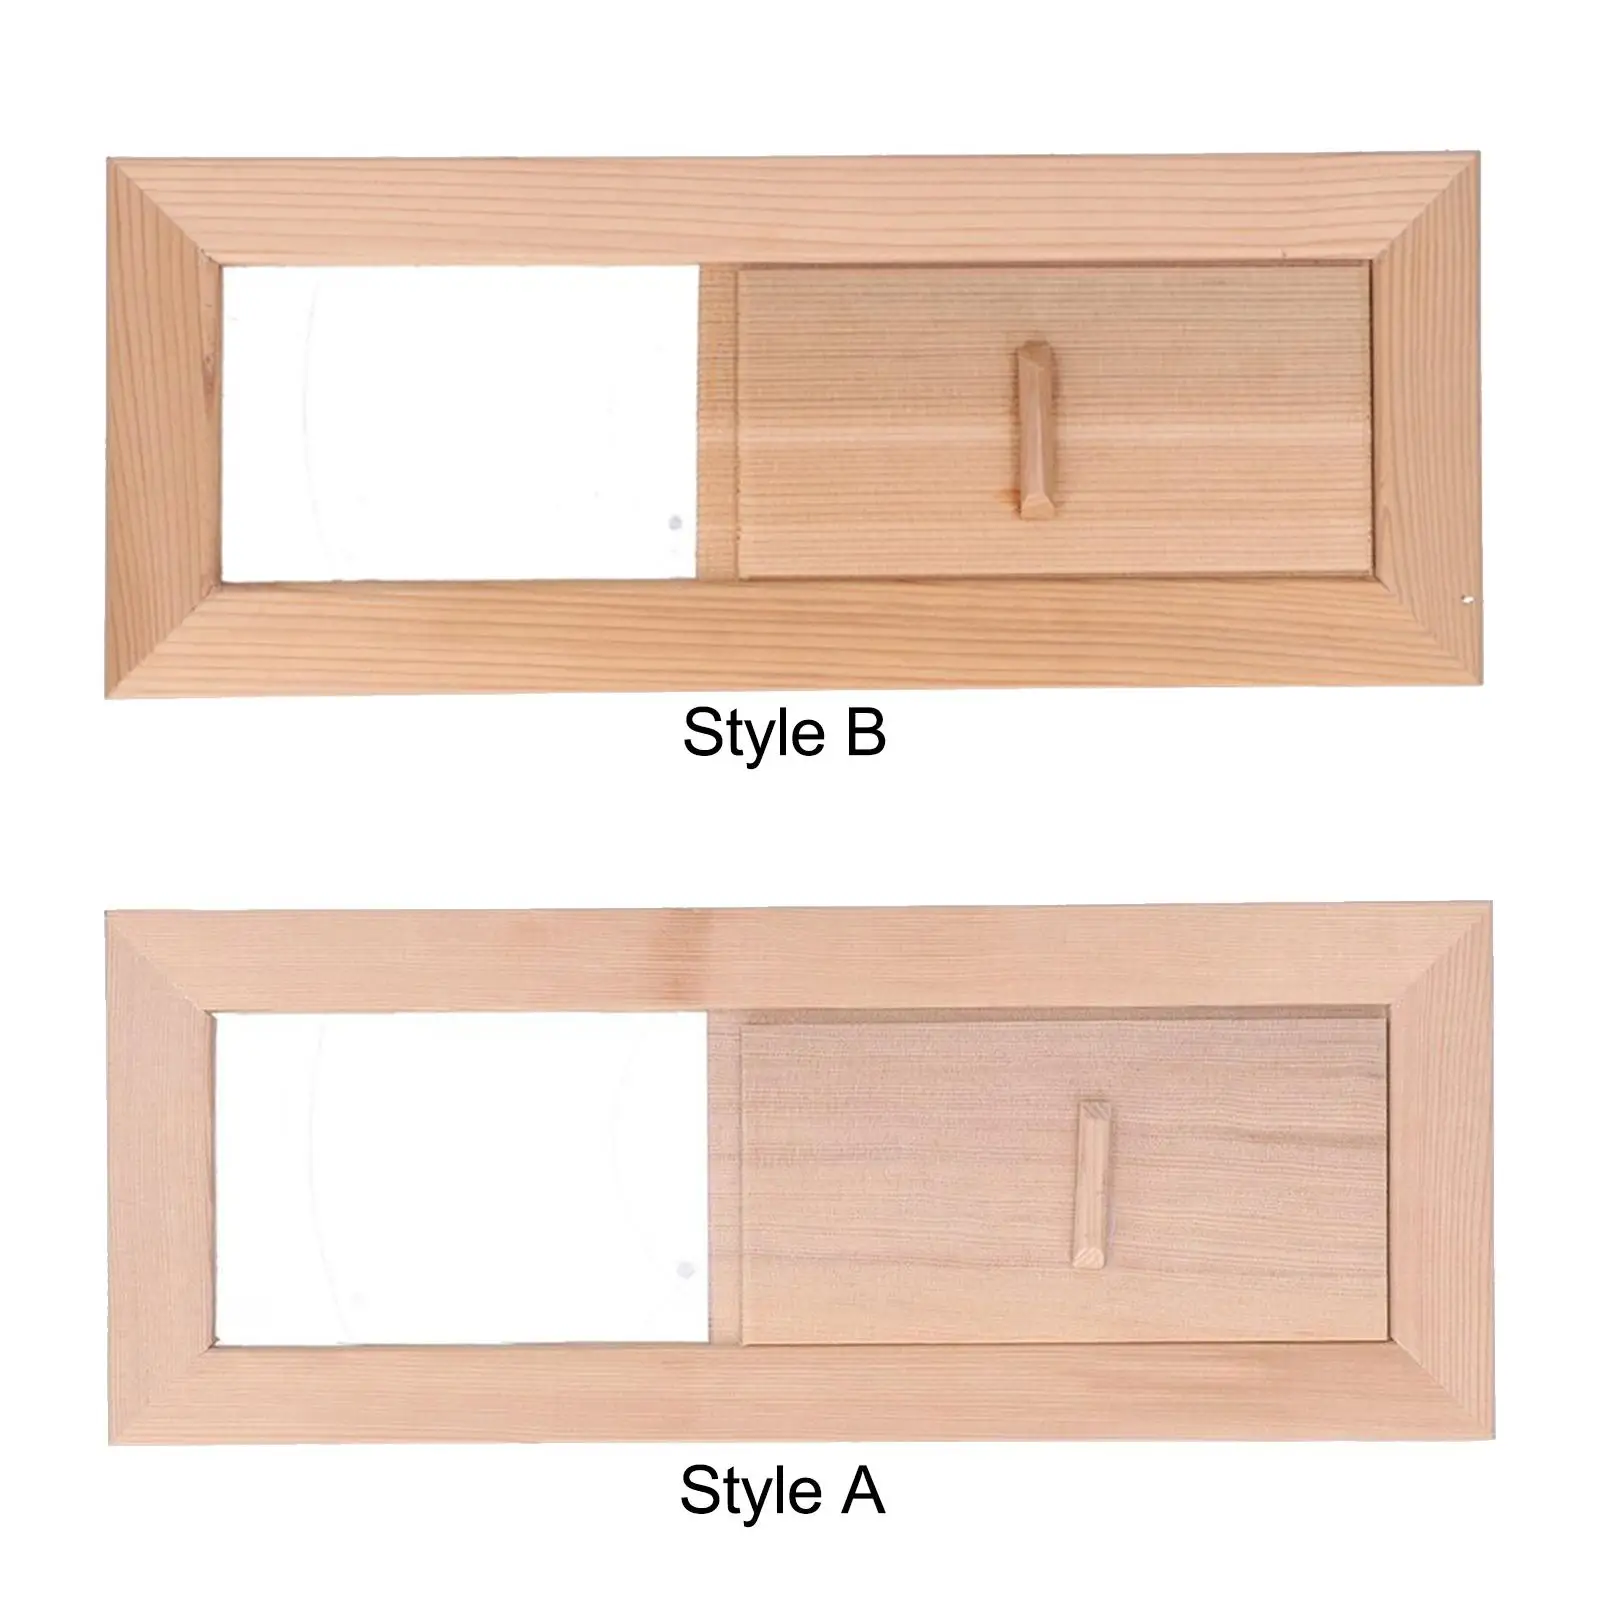 Air Vent Grille Adjustable Sauna Room Wall Ventilation Wooden Rectangle Air Vent for Sauna Room Steam Room Accessories